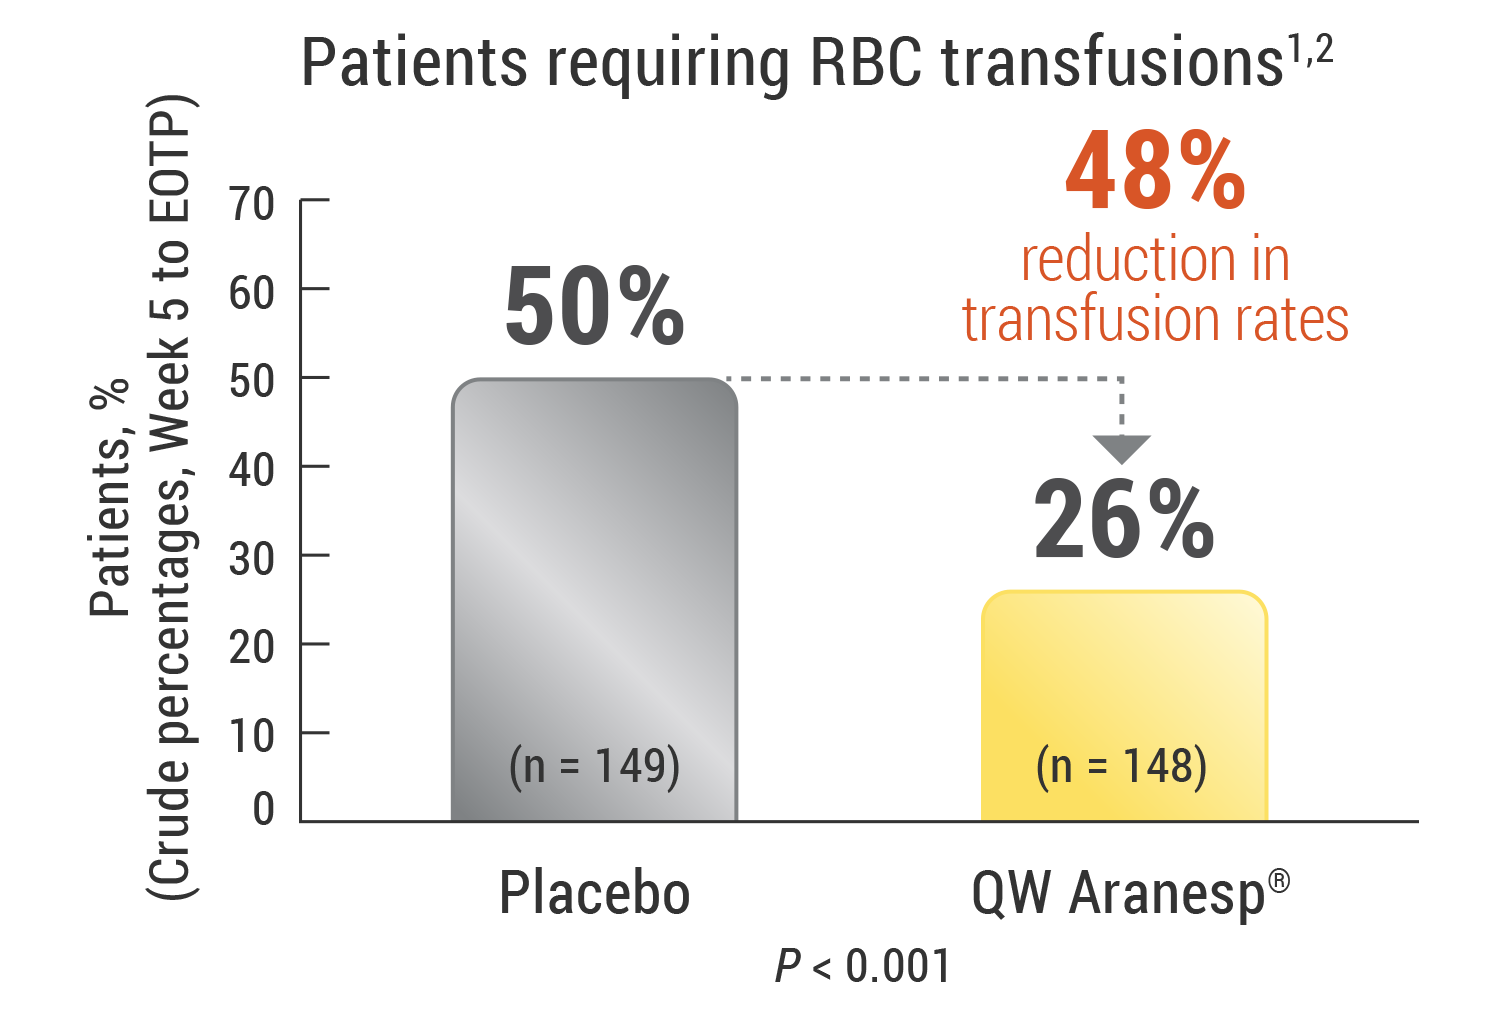 Aranesp® (darbepoetin alfa) reduced the need for red blood cell transfusions vs placebo.